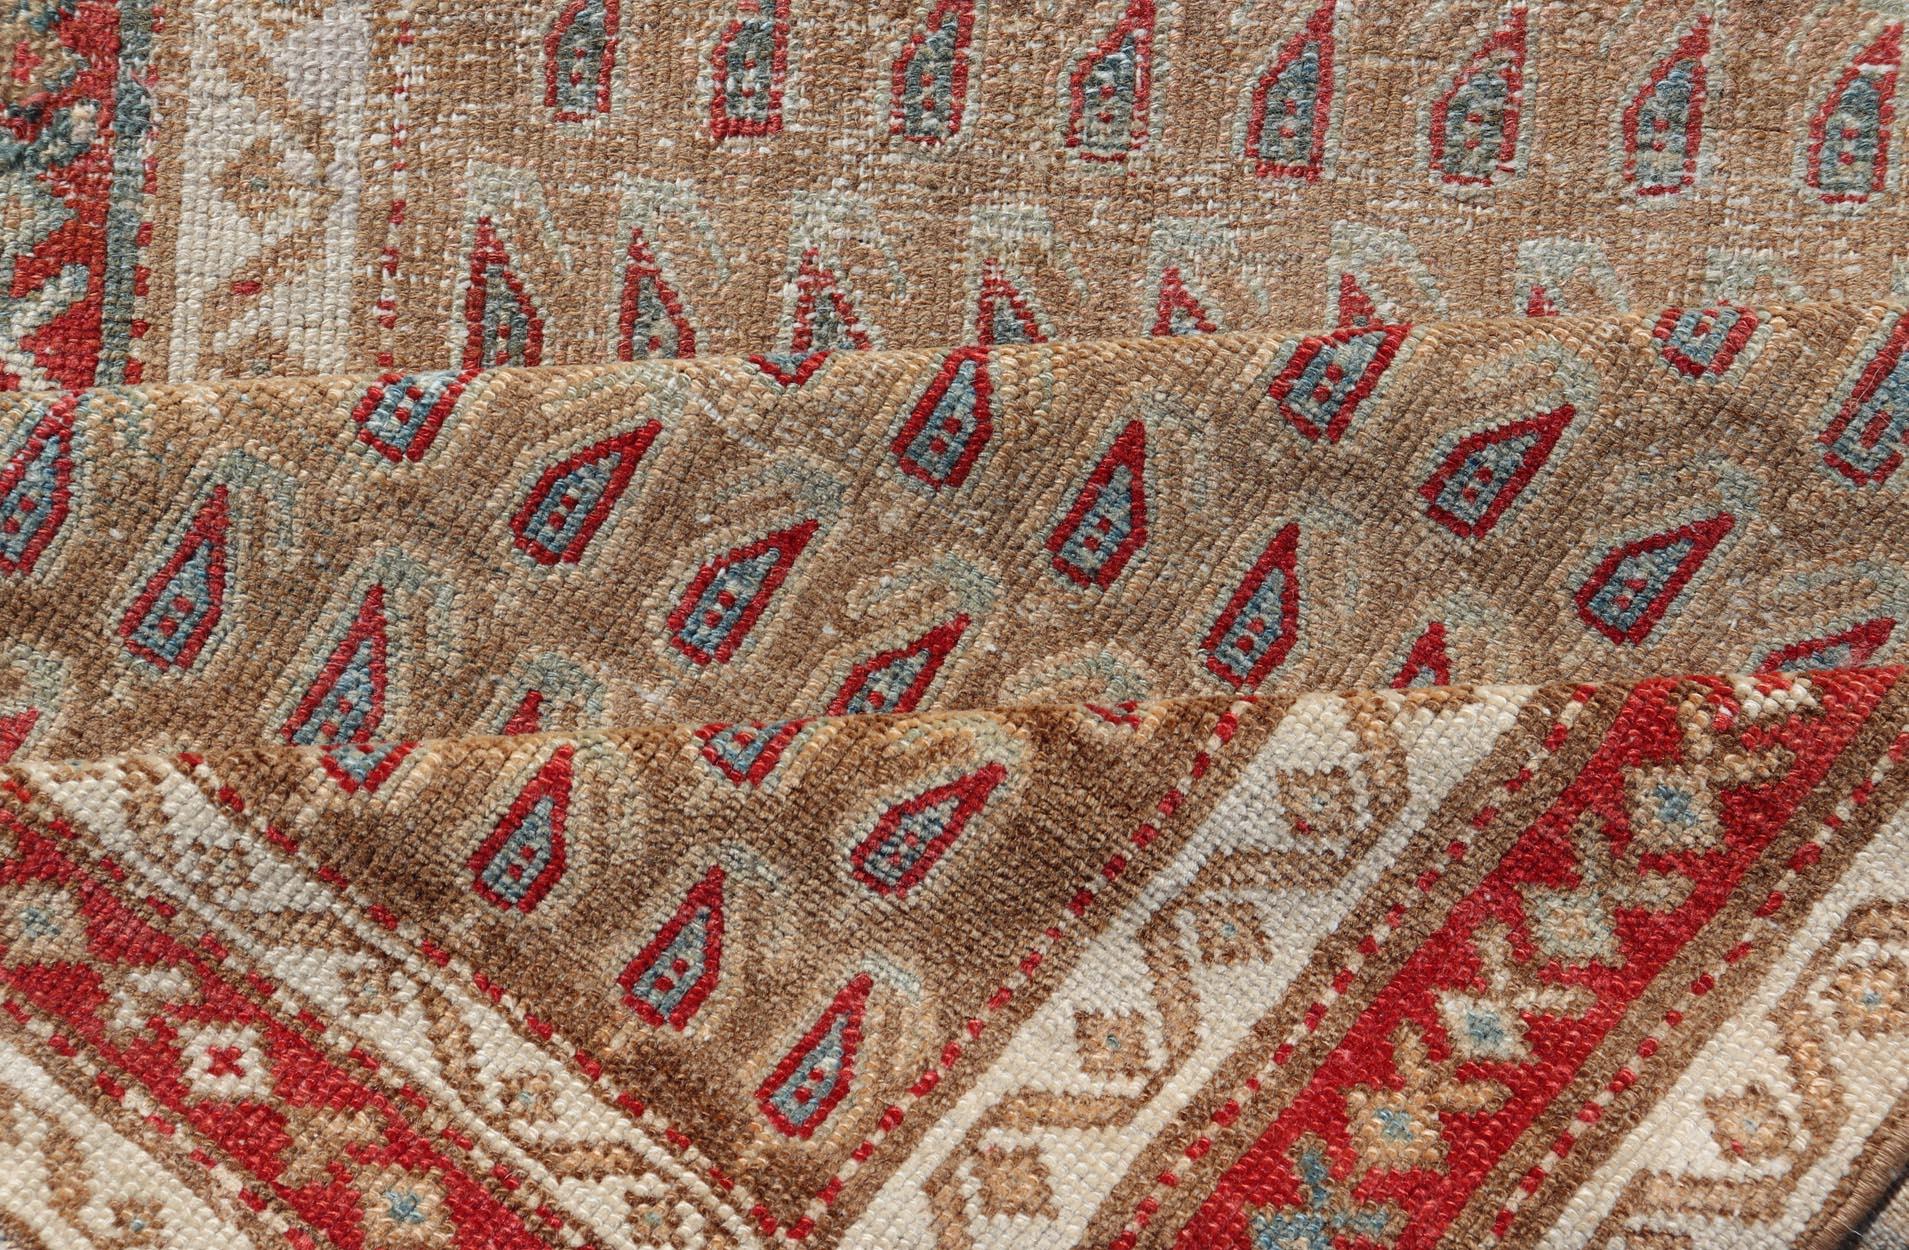 Antique Malayer Runner with All-Over Paisley Design in Red, Brown, and Blue For Sale 5